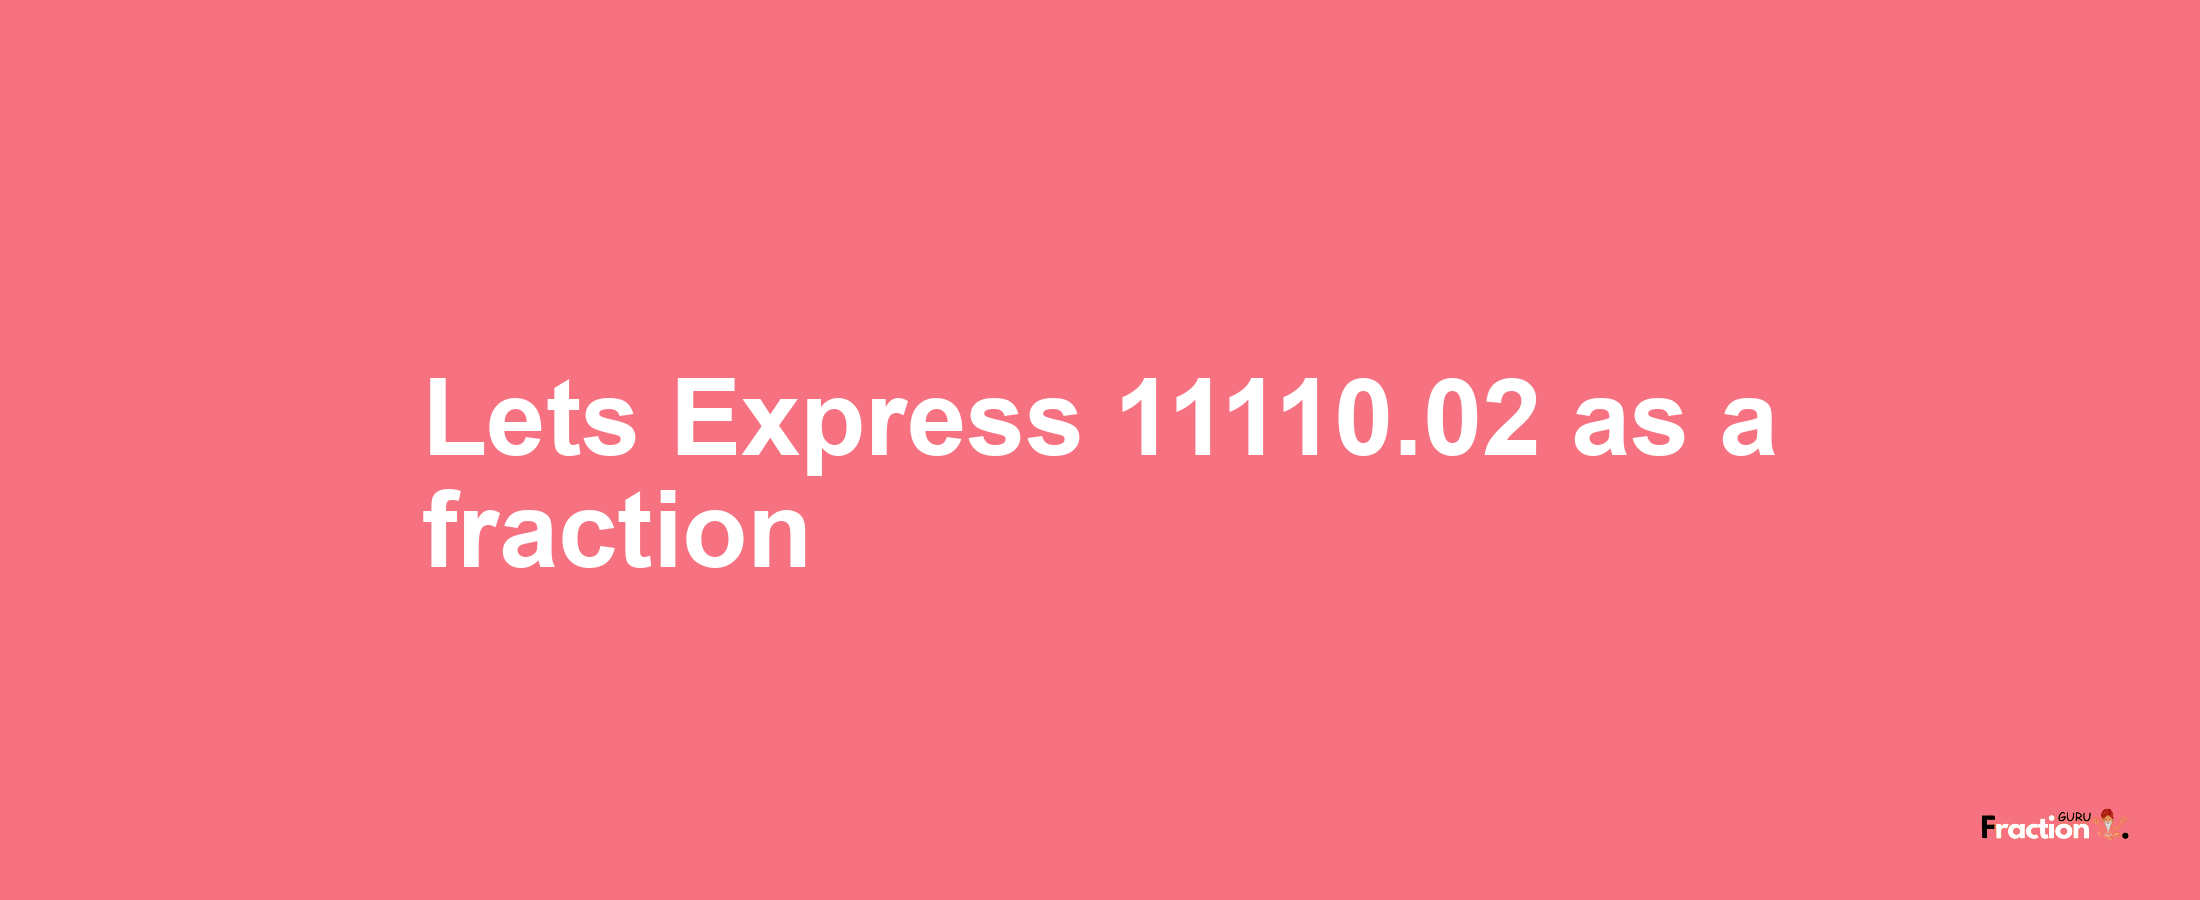 Lets Express 11110.02 as afraction